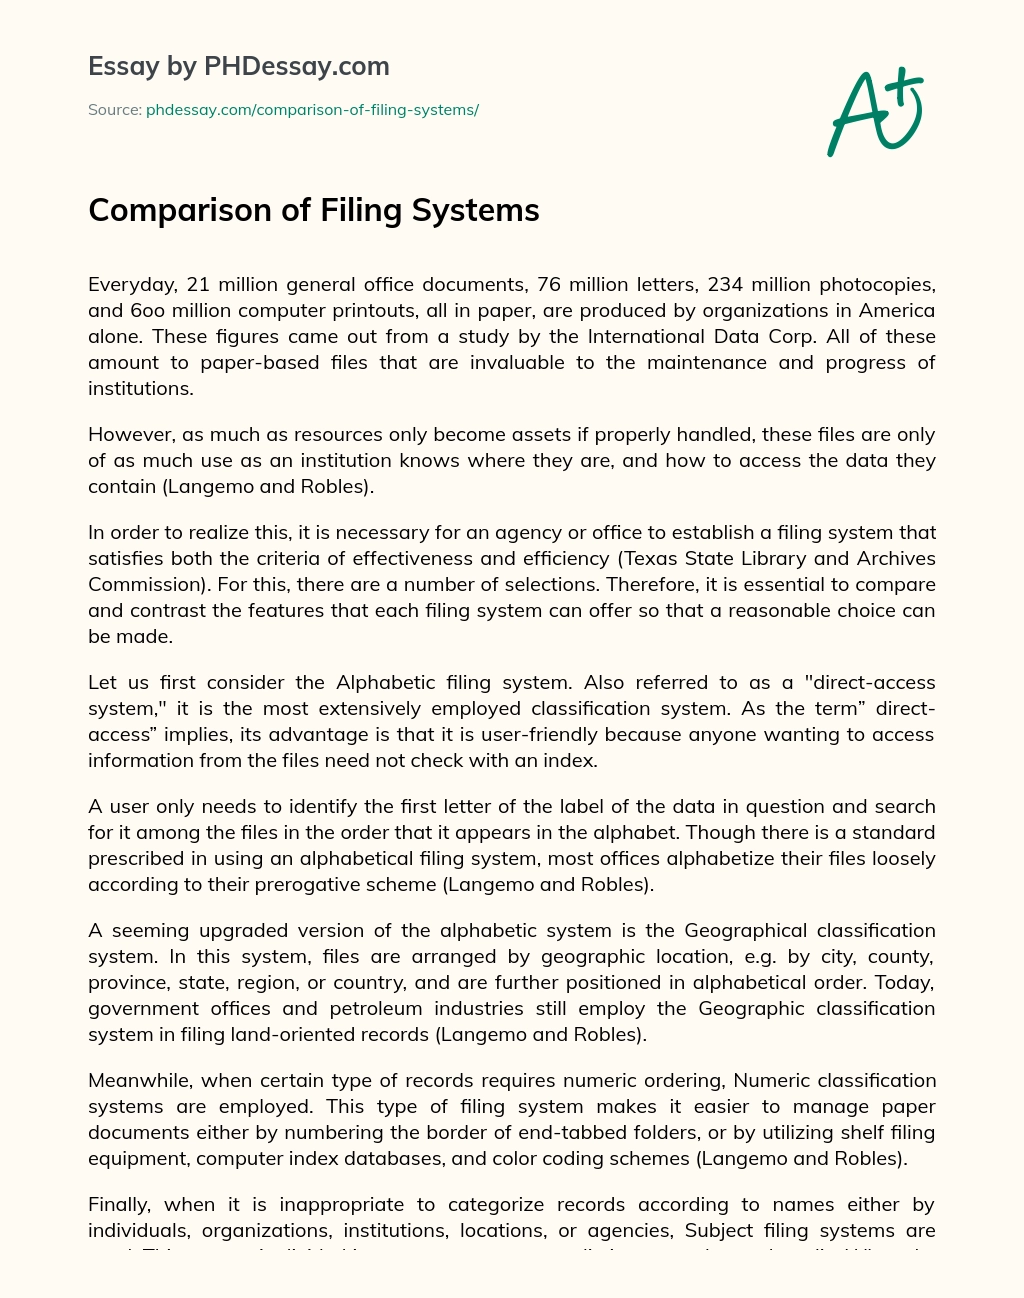 Comparison of Filing Systems essay